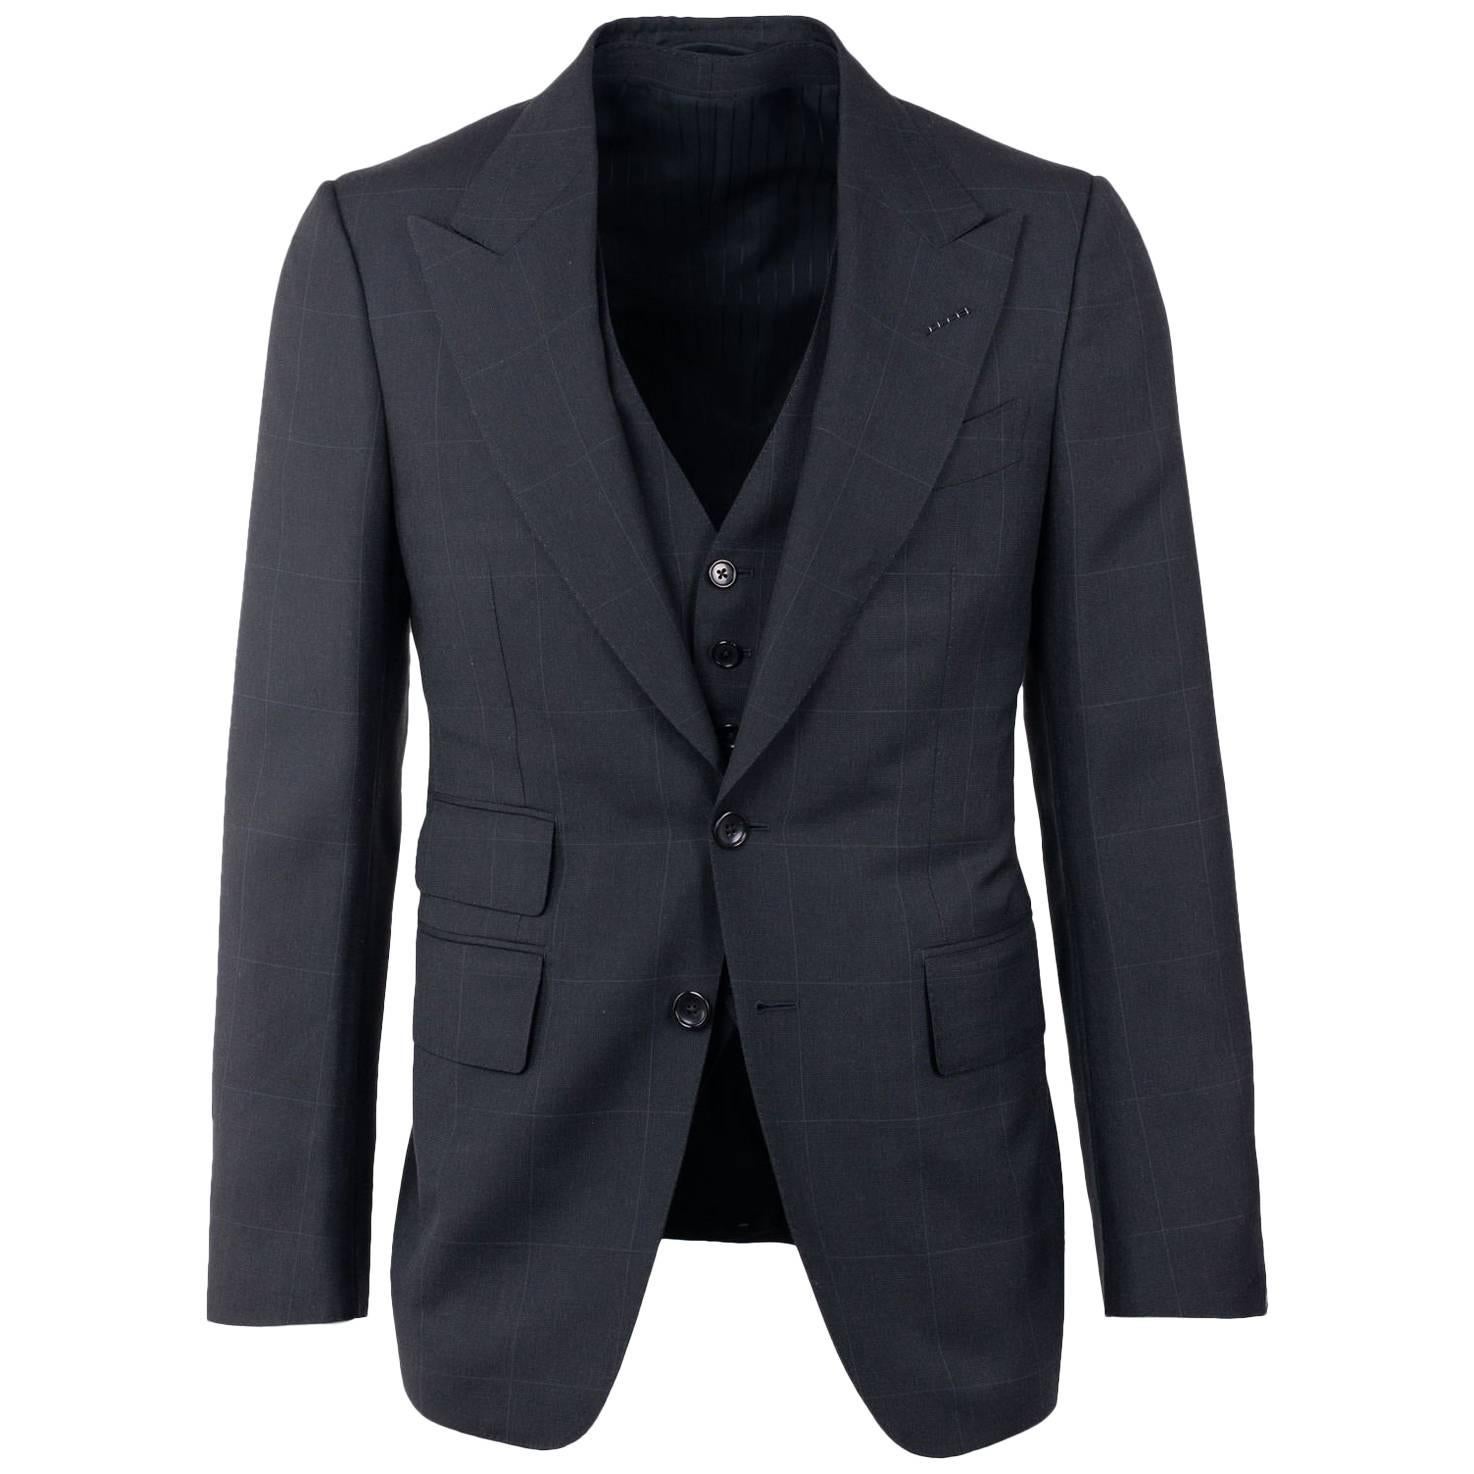  Tom Ford Black Windowpane Wool Blend Three Piece Suit For Sale